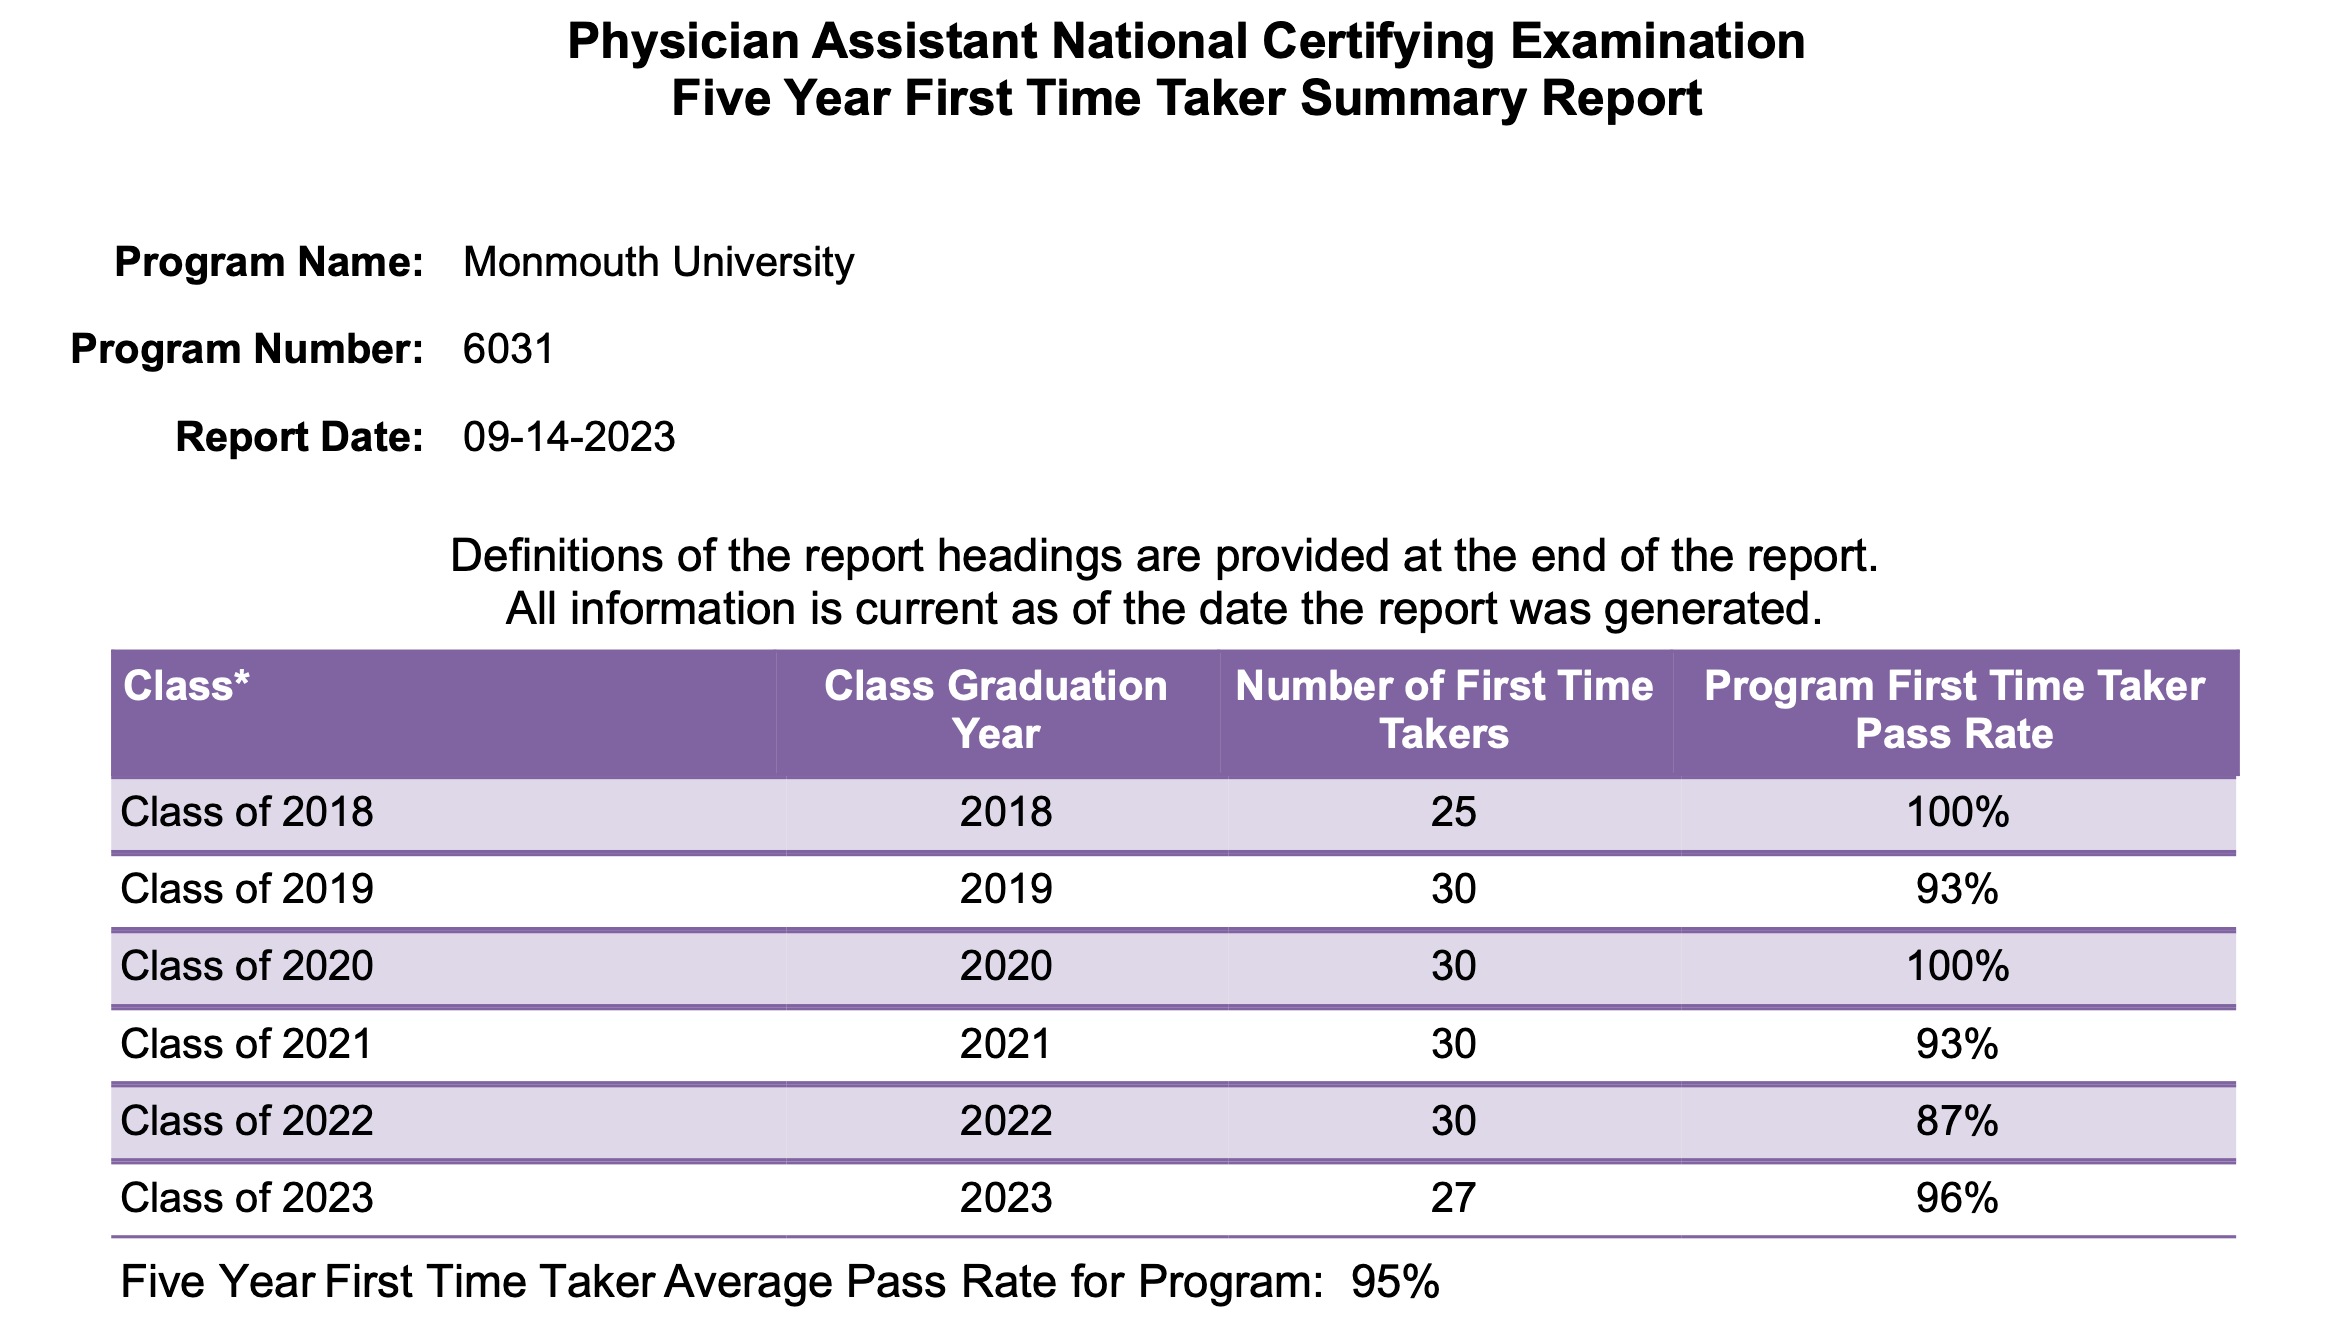 Image shows findings of Physician Assistant National Certifying Examination Five Year First Time Taker Summary Report for October 2023